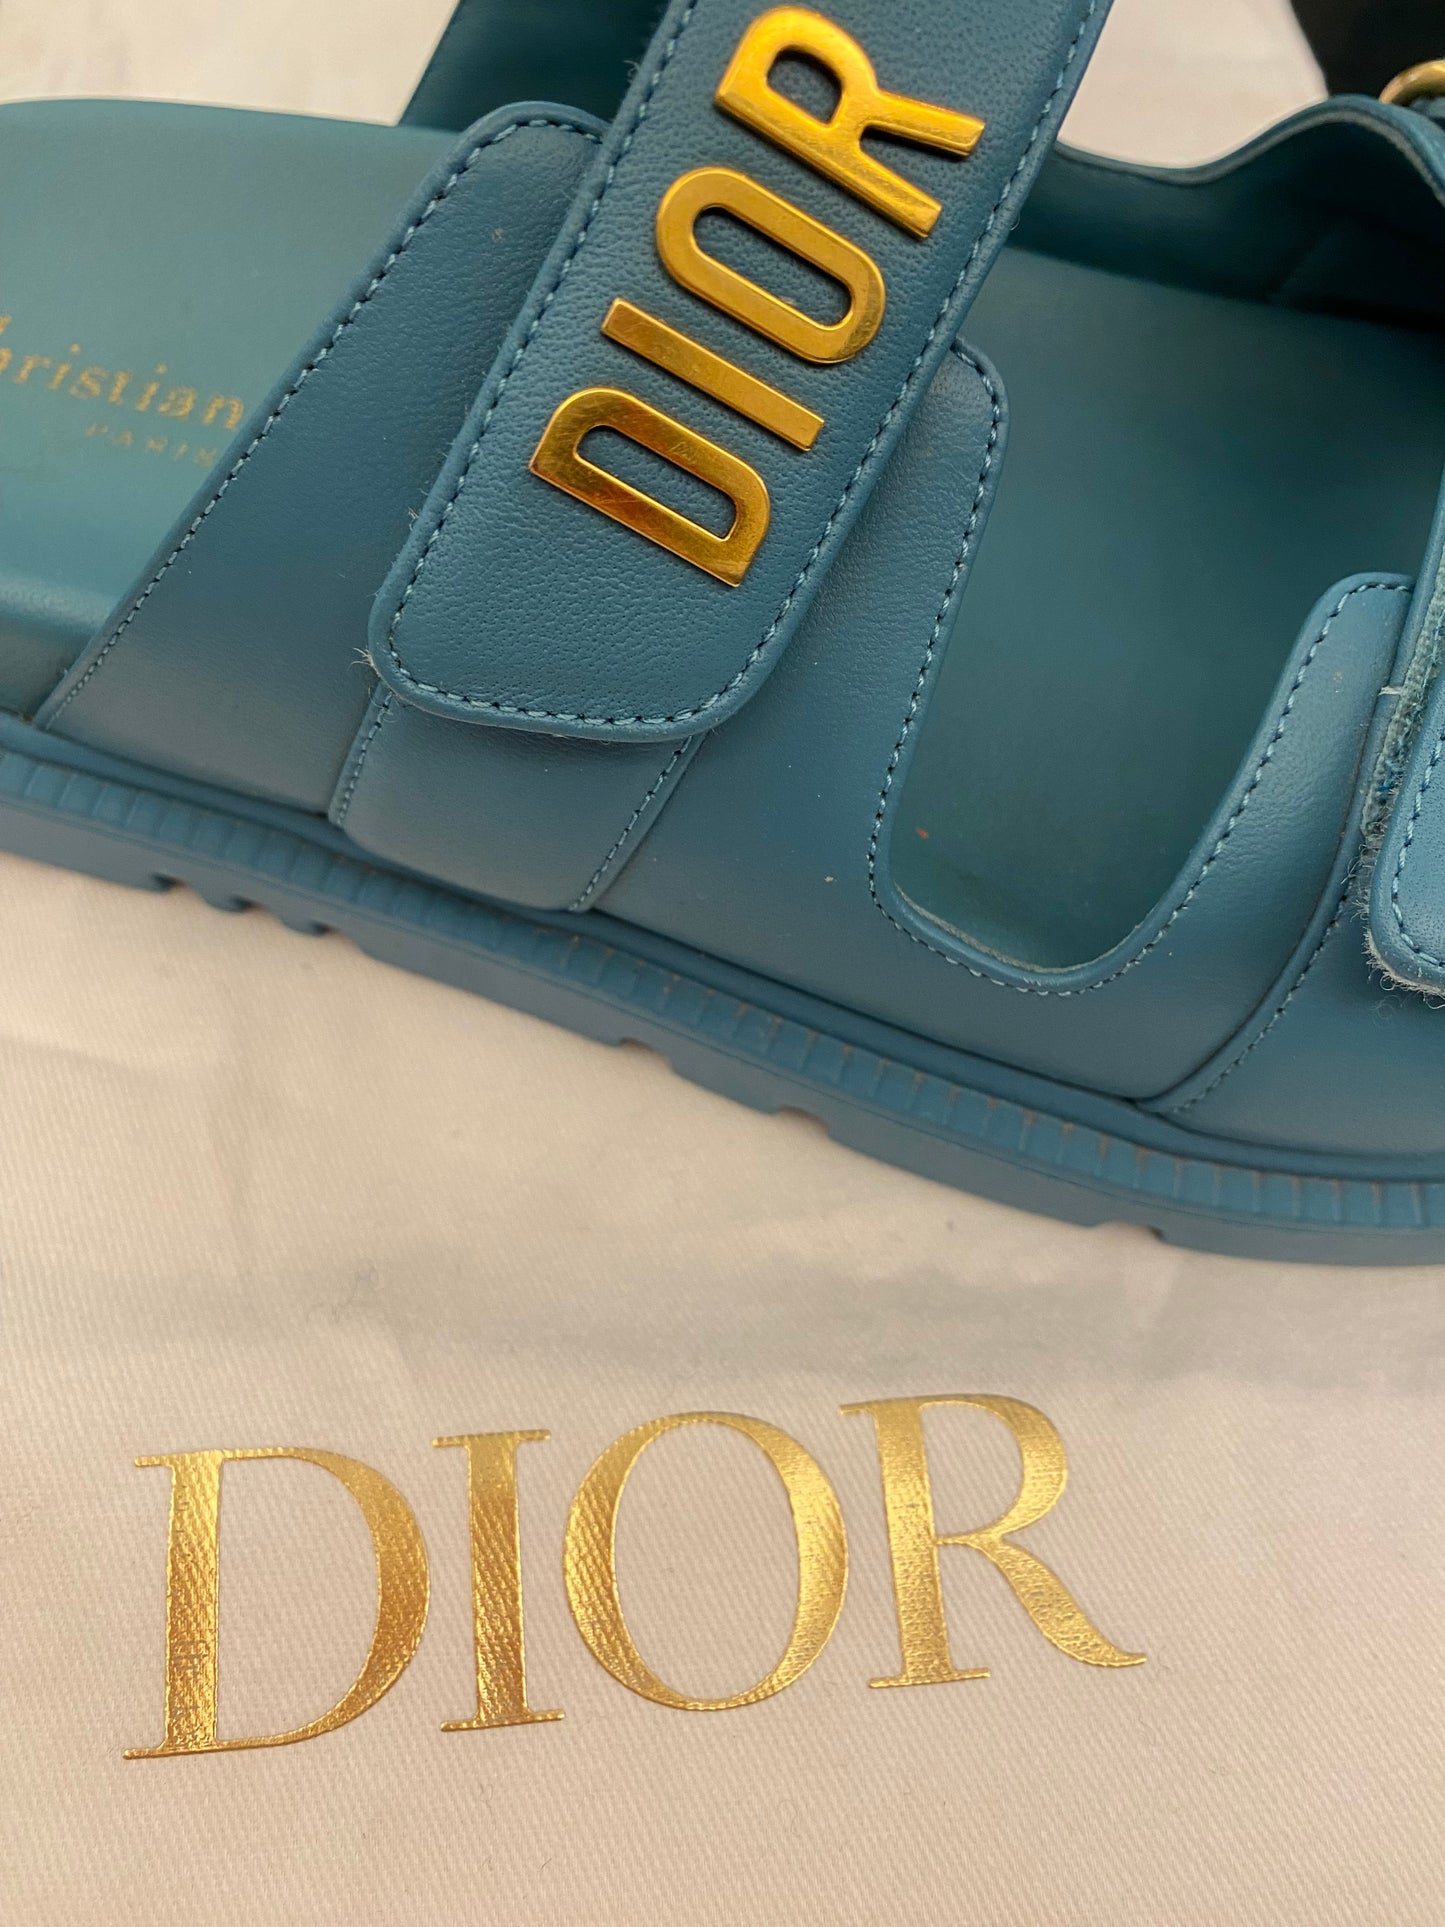 DIOR Dioract Slide Turquoise Blue Size 38